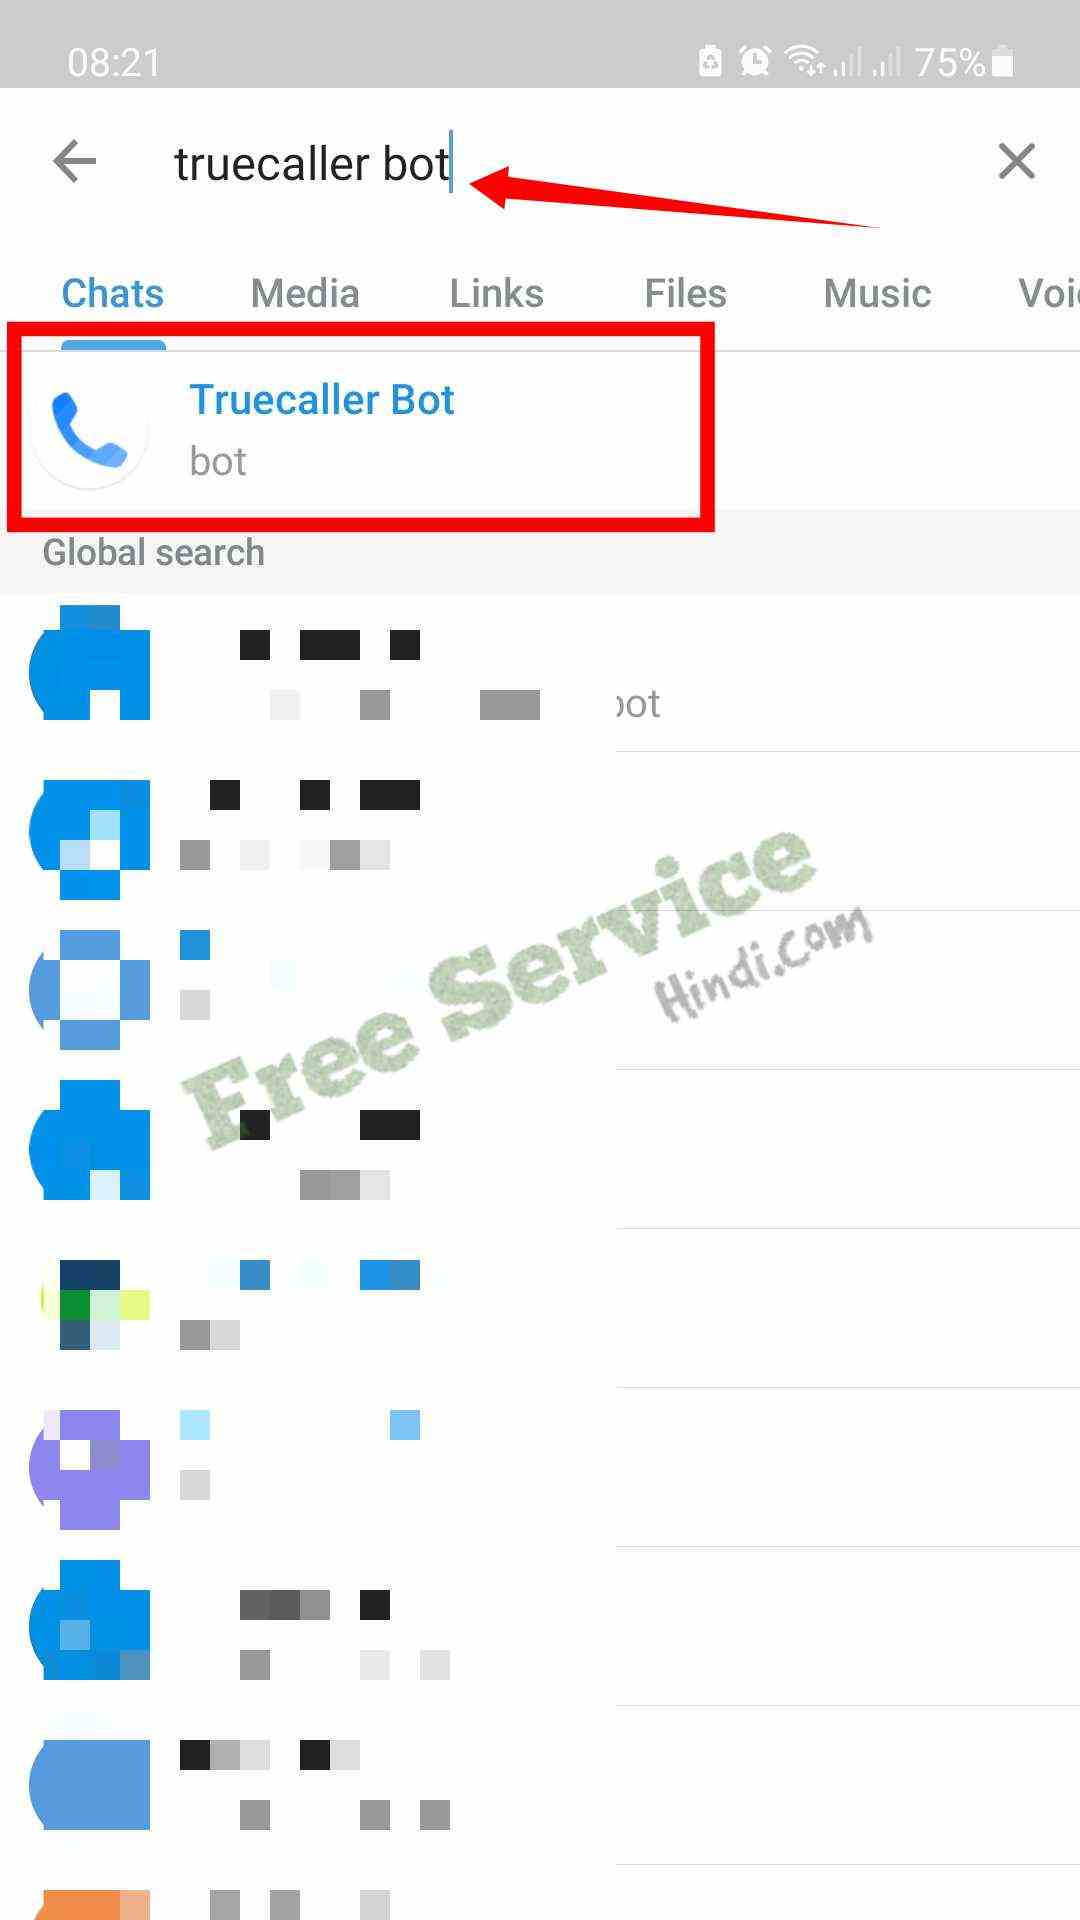 Get Jio Number Details, Name with Address in Telegram